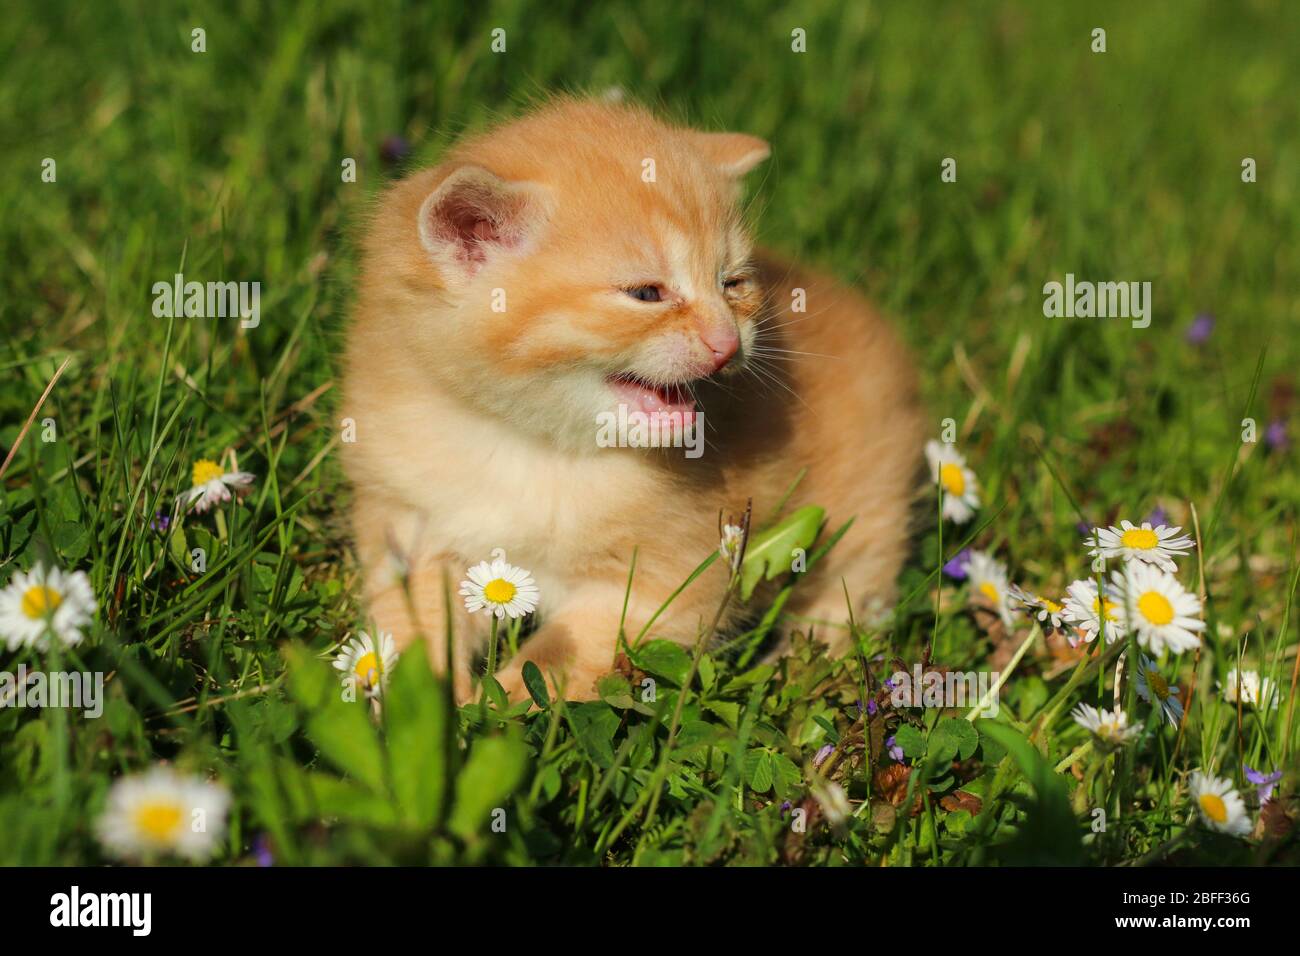 The portrait of a young three weeks old kitten in the grass and flowers. Looking cute and happy with funny expression while meowing. Stock Photo